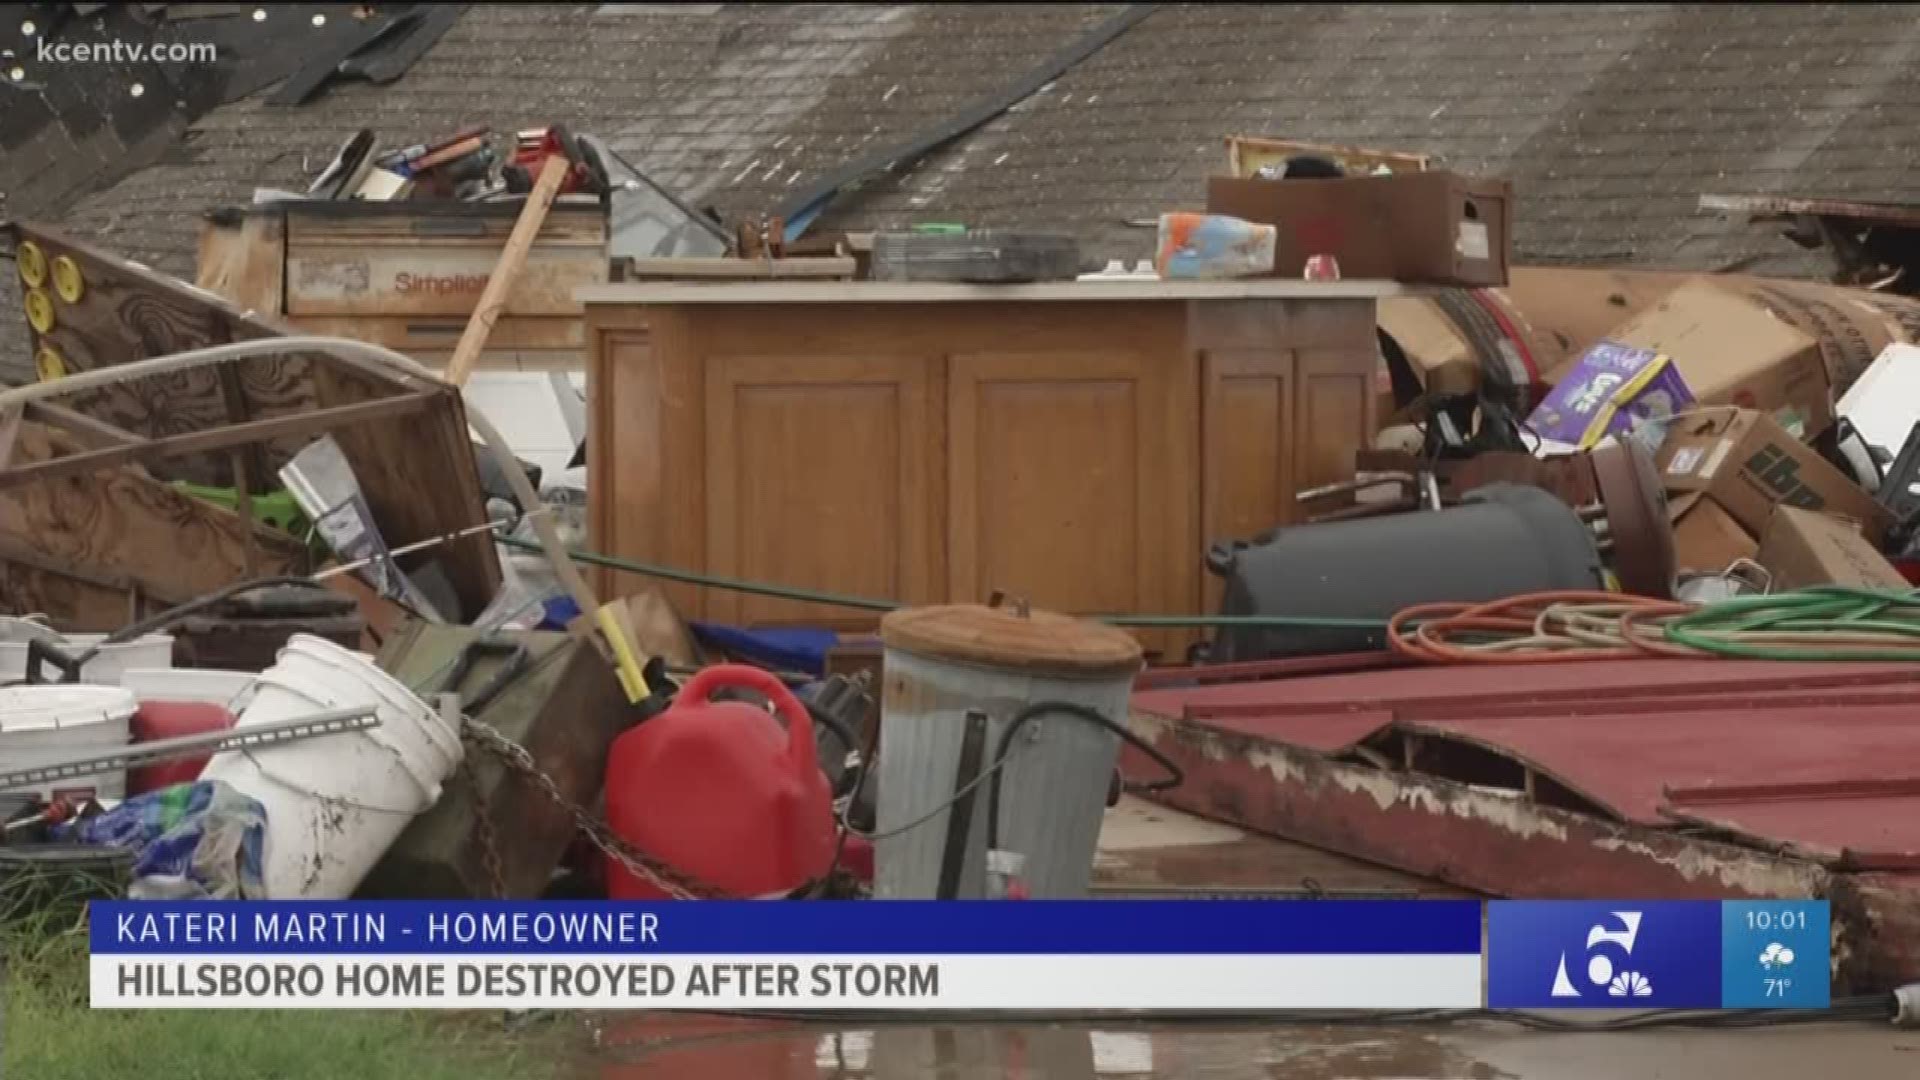 A Hillsboro family's home was destroyed during one of the three tornados that touched down in Central Texas Saturday.